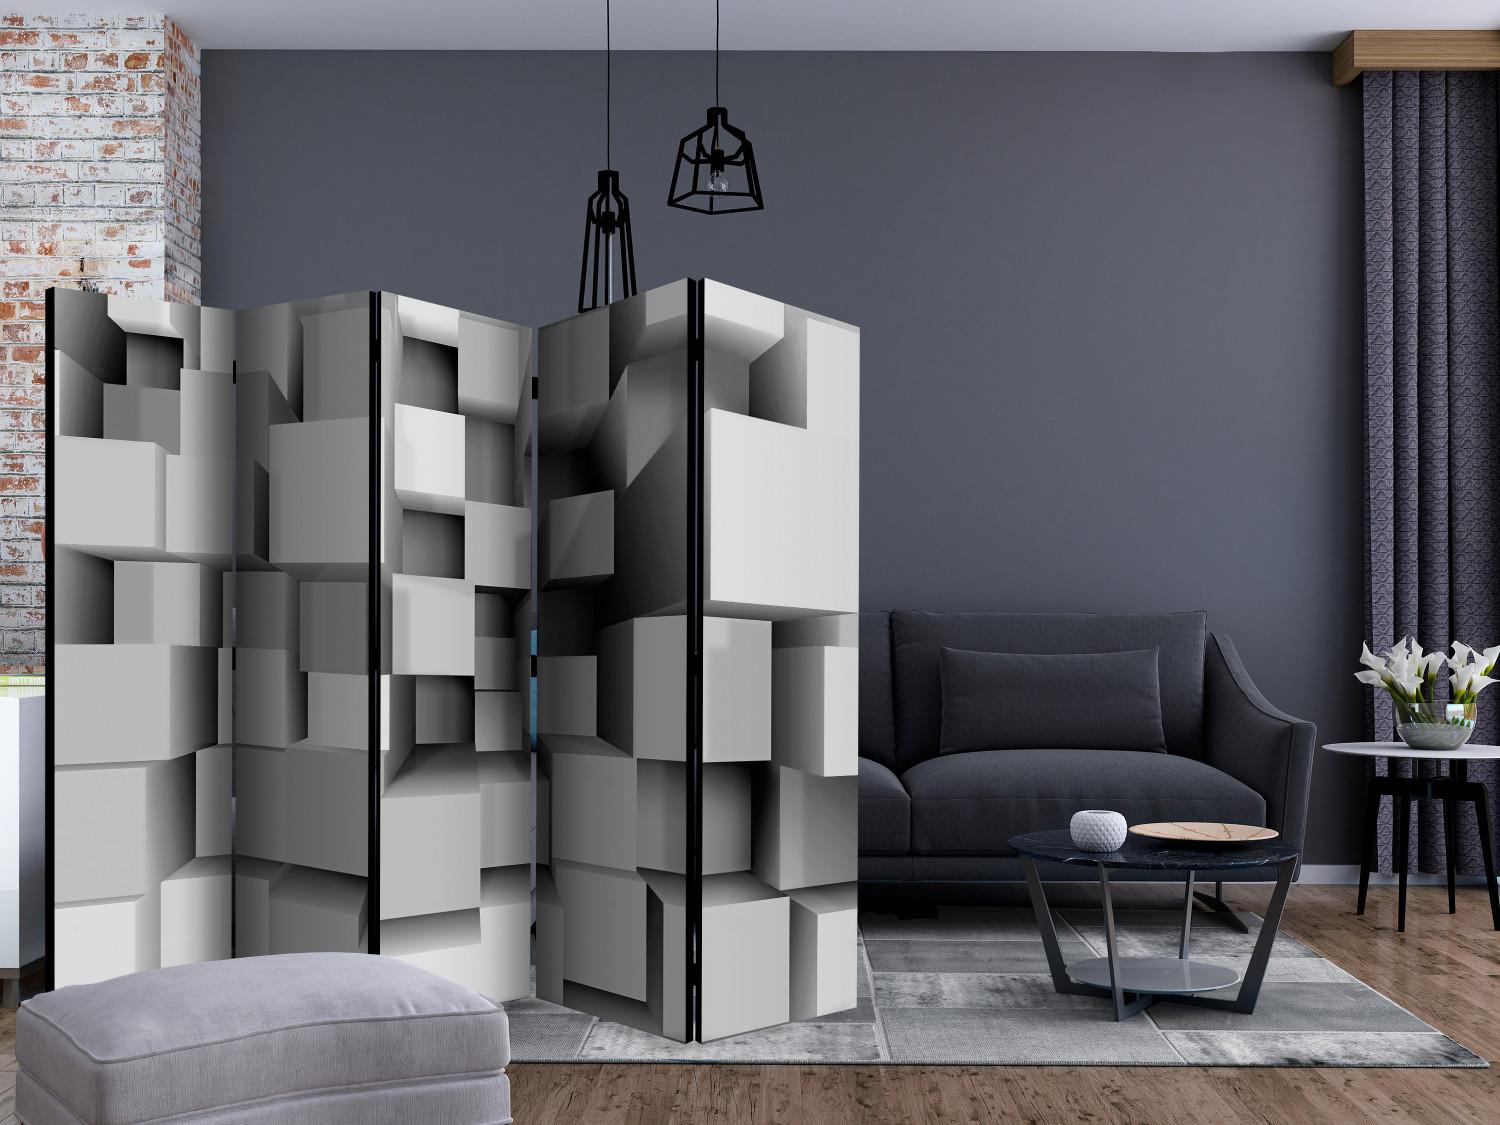 Room Divider Mechanical Symmetry II - abstract gray geometric figures in 3D